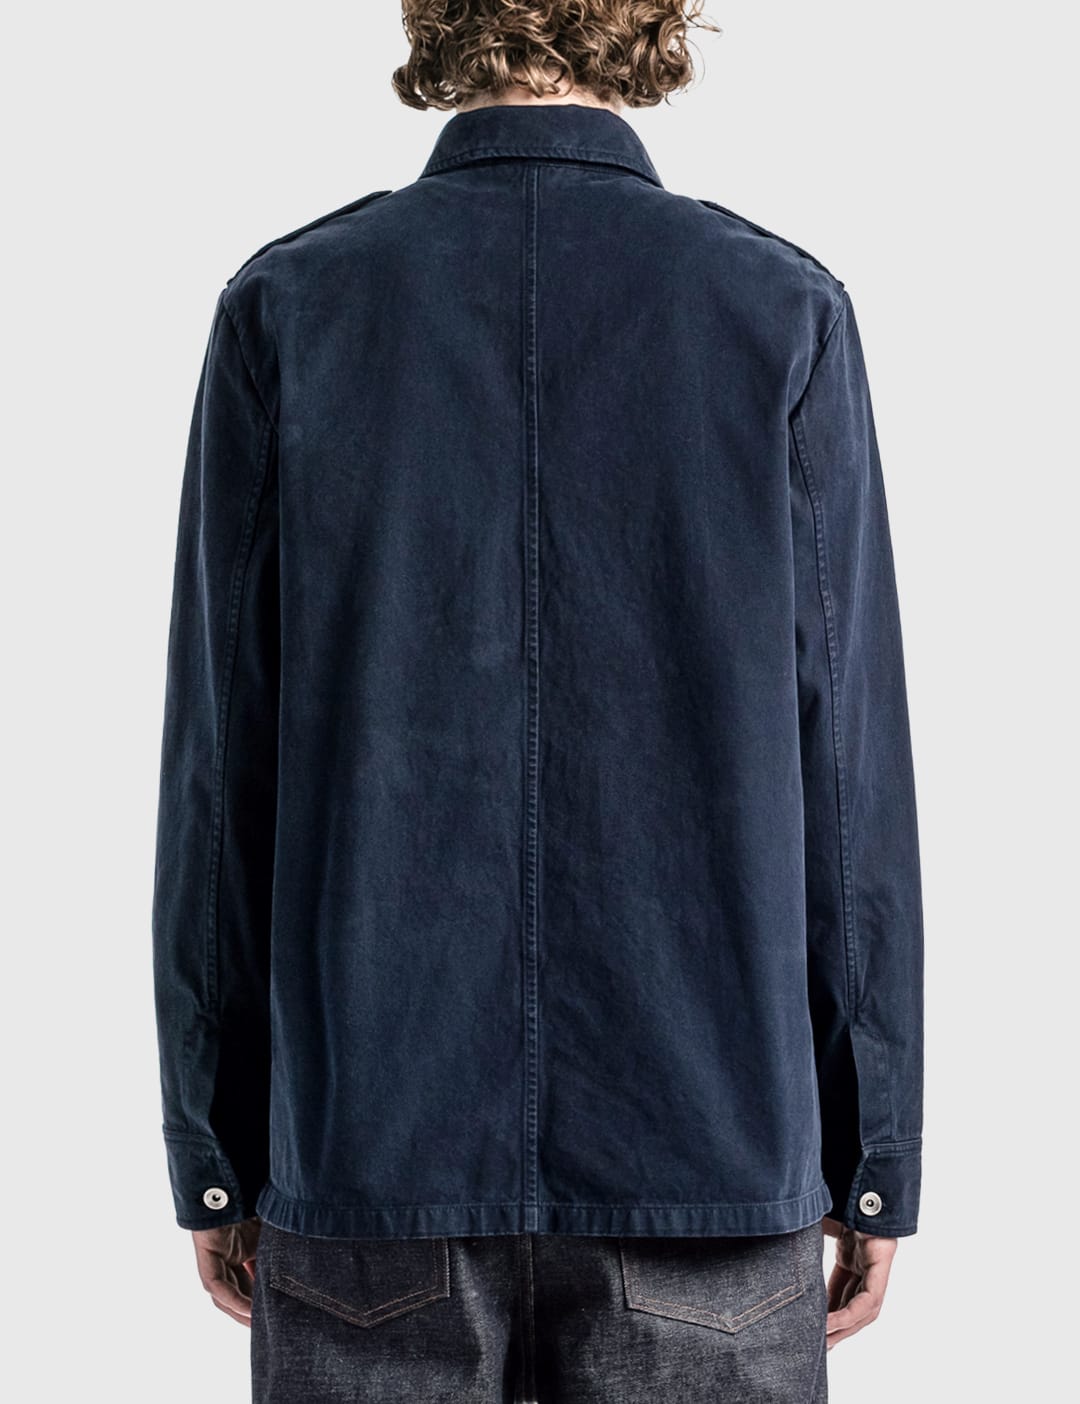 A.P.C.   Sideways Jacket   HBX   Globally Curated Fashion and